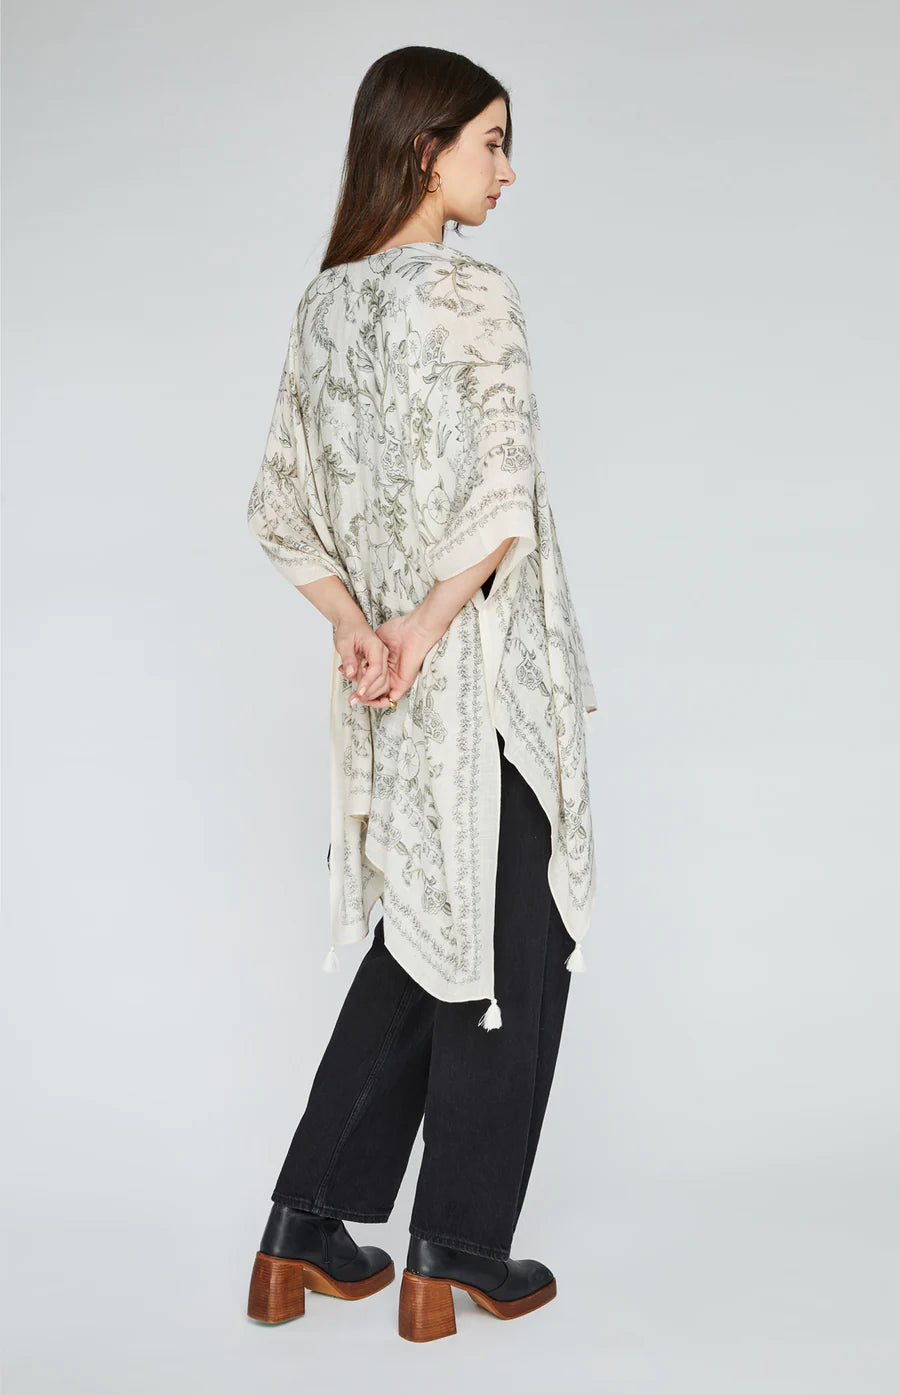 Gentle Fawn Ledger Cover-Up - Cream Botanical